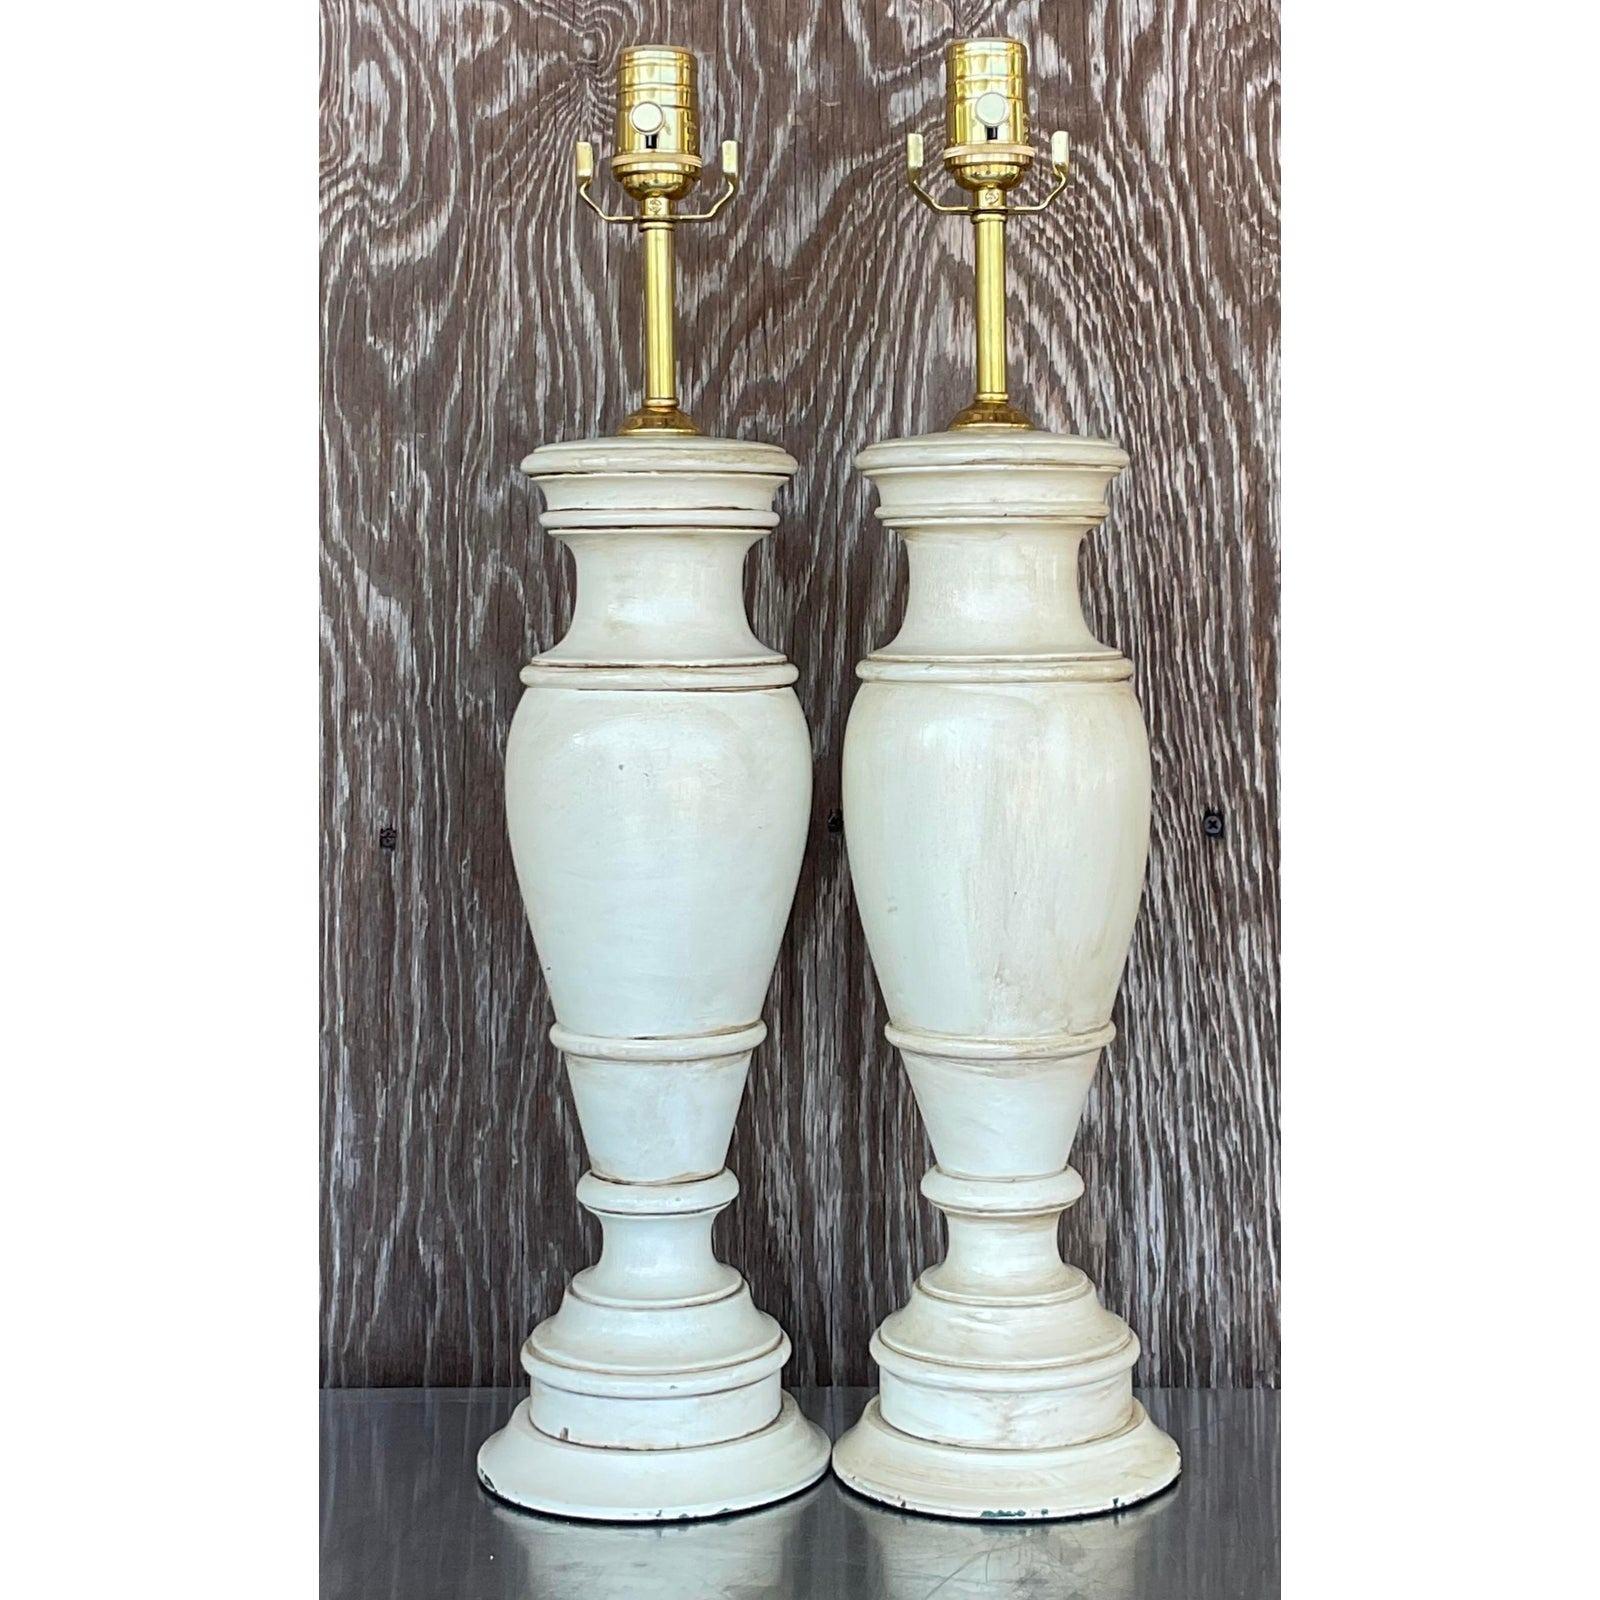 A fabulous pair of vintage boho turned wood lamps. A faux finish on a classic Baluster shape. Acquired from a Palm Beach estate.

The lamps are in great vintage condition. Minor scuffs and blemishes appropriate to their age and use. Chips to the